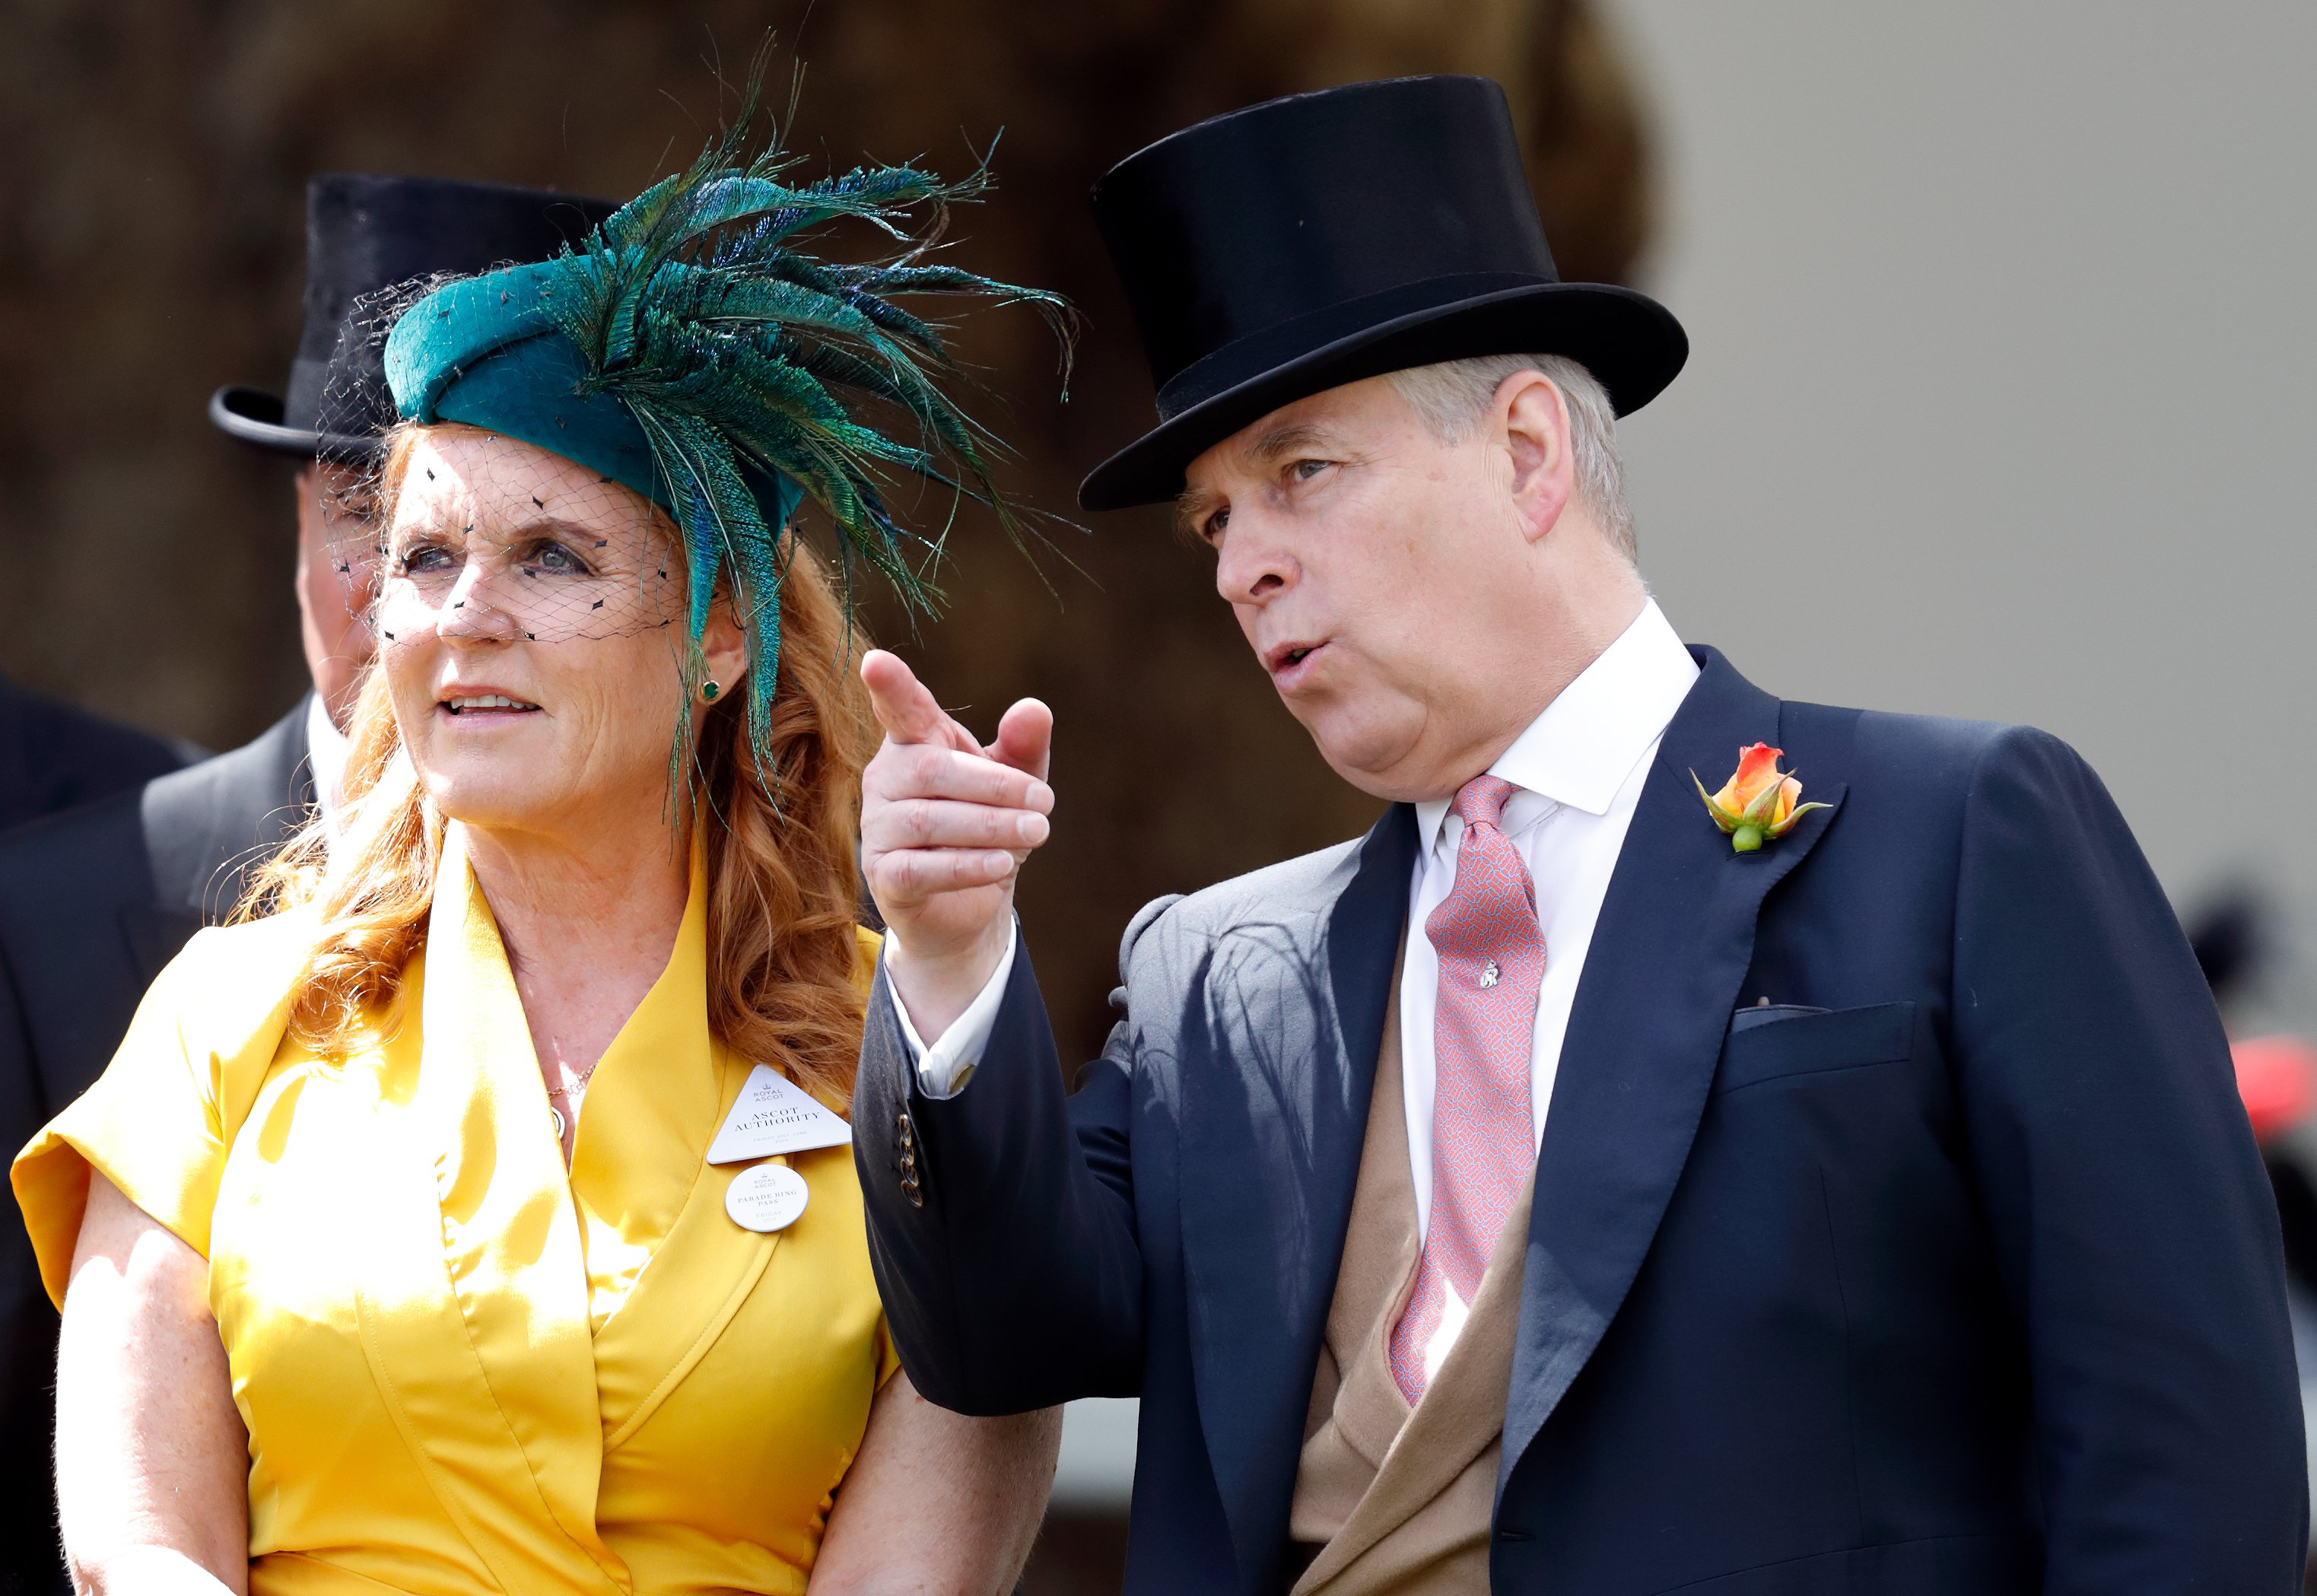 Sarah Ferguson, Duchess of York and Prince Andrew, Duke of York at day four of Royal Ascot at Ascot Racecourse on June 21, 2019 in Ascot, England. | Source: Getty Images